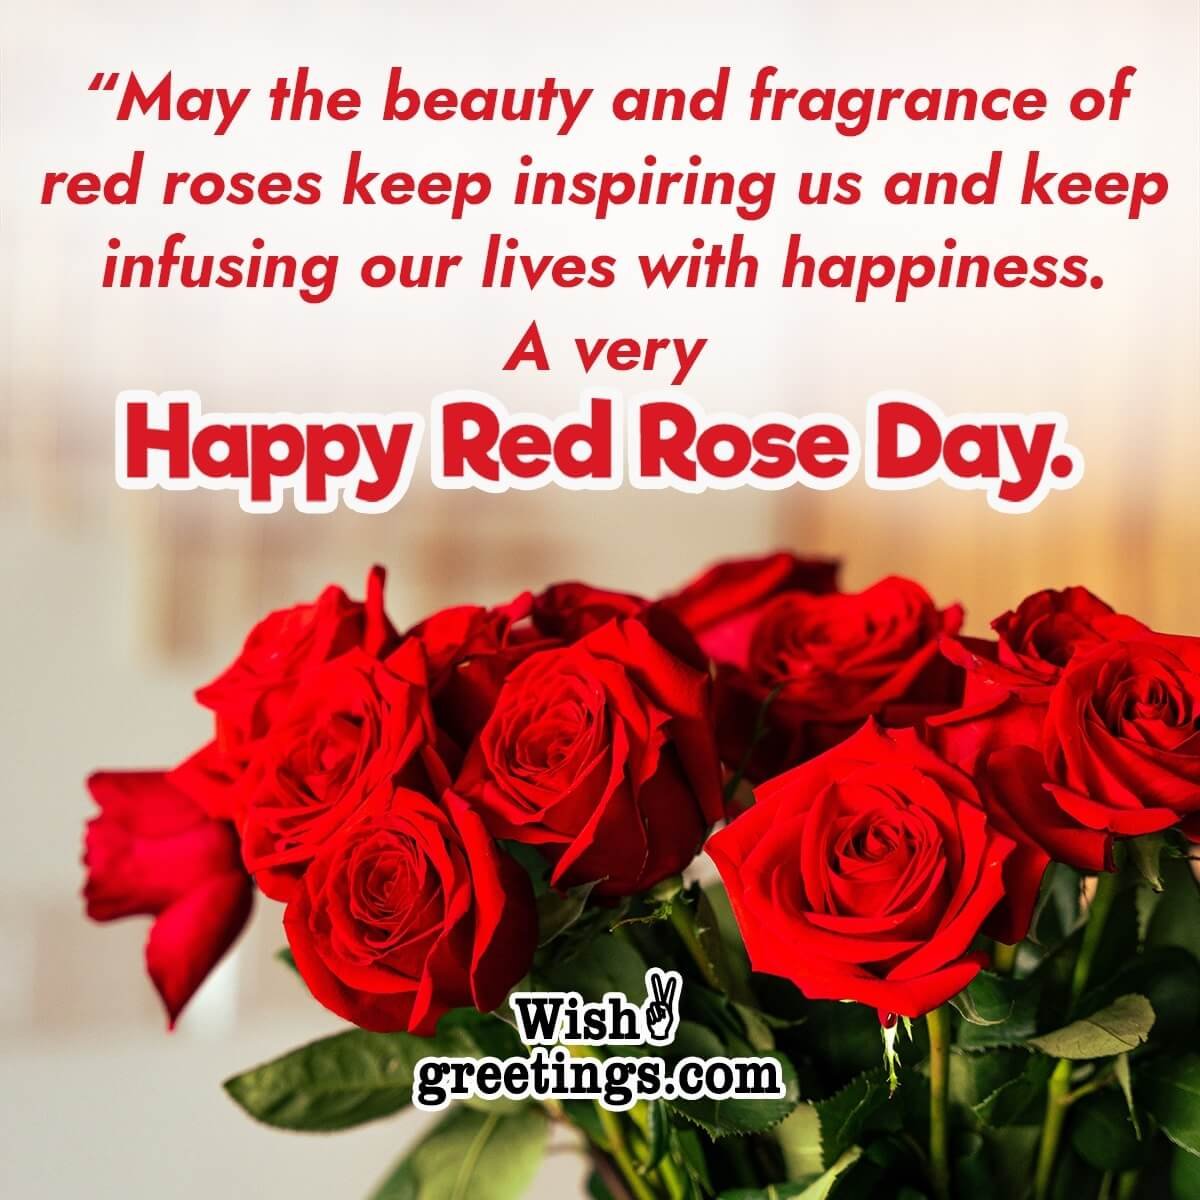 Red Rose Day Wishes Messages - Wish Greetings